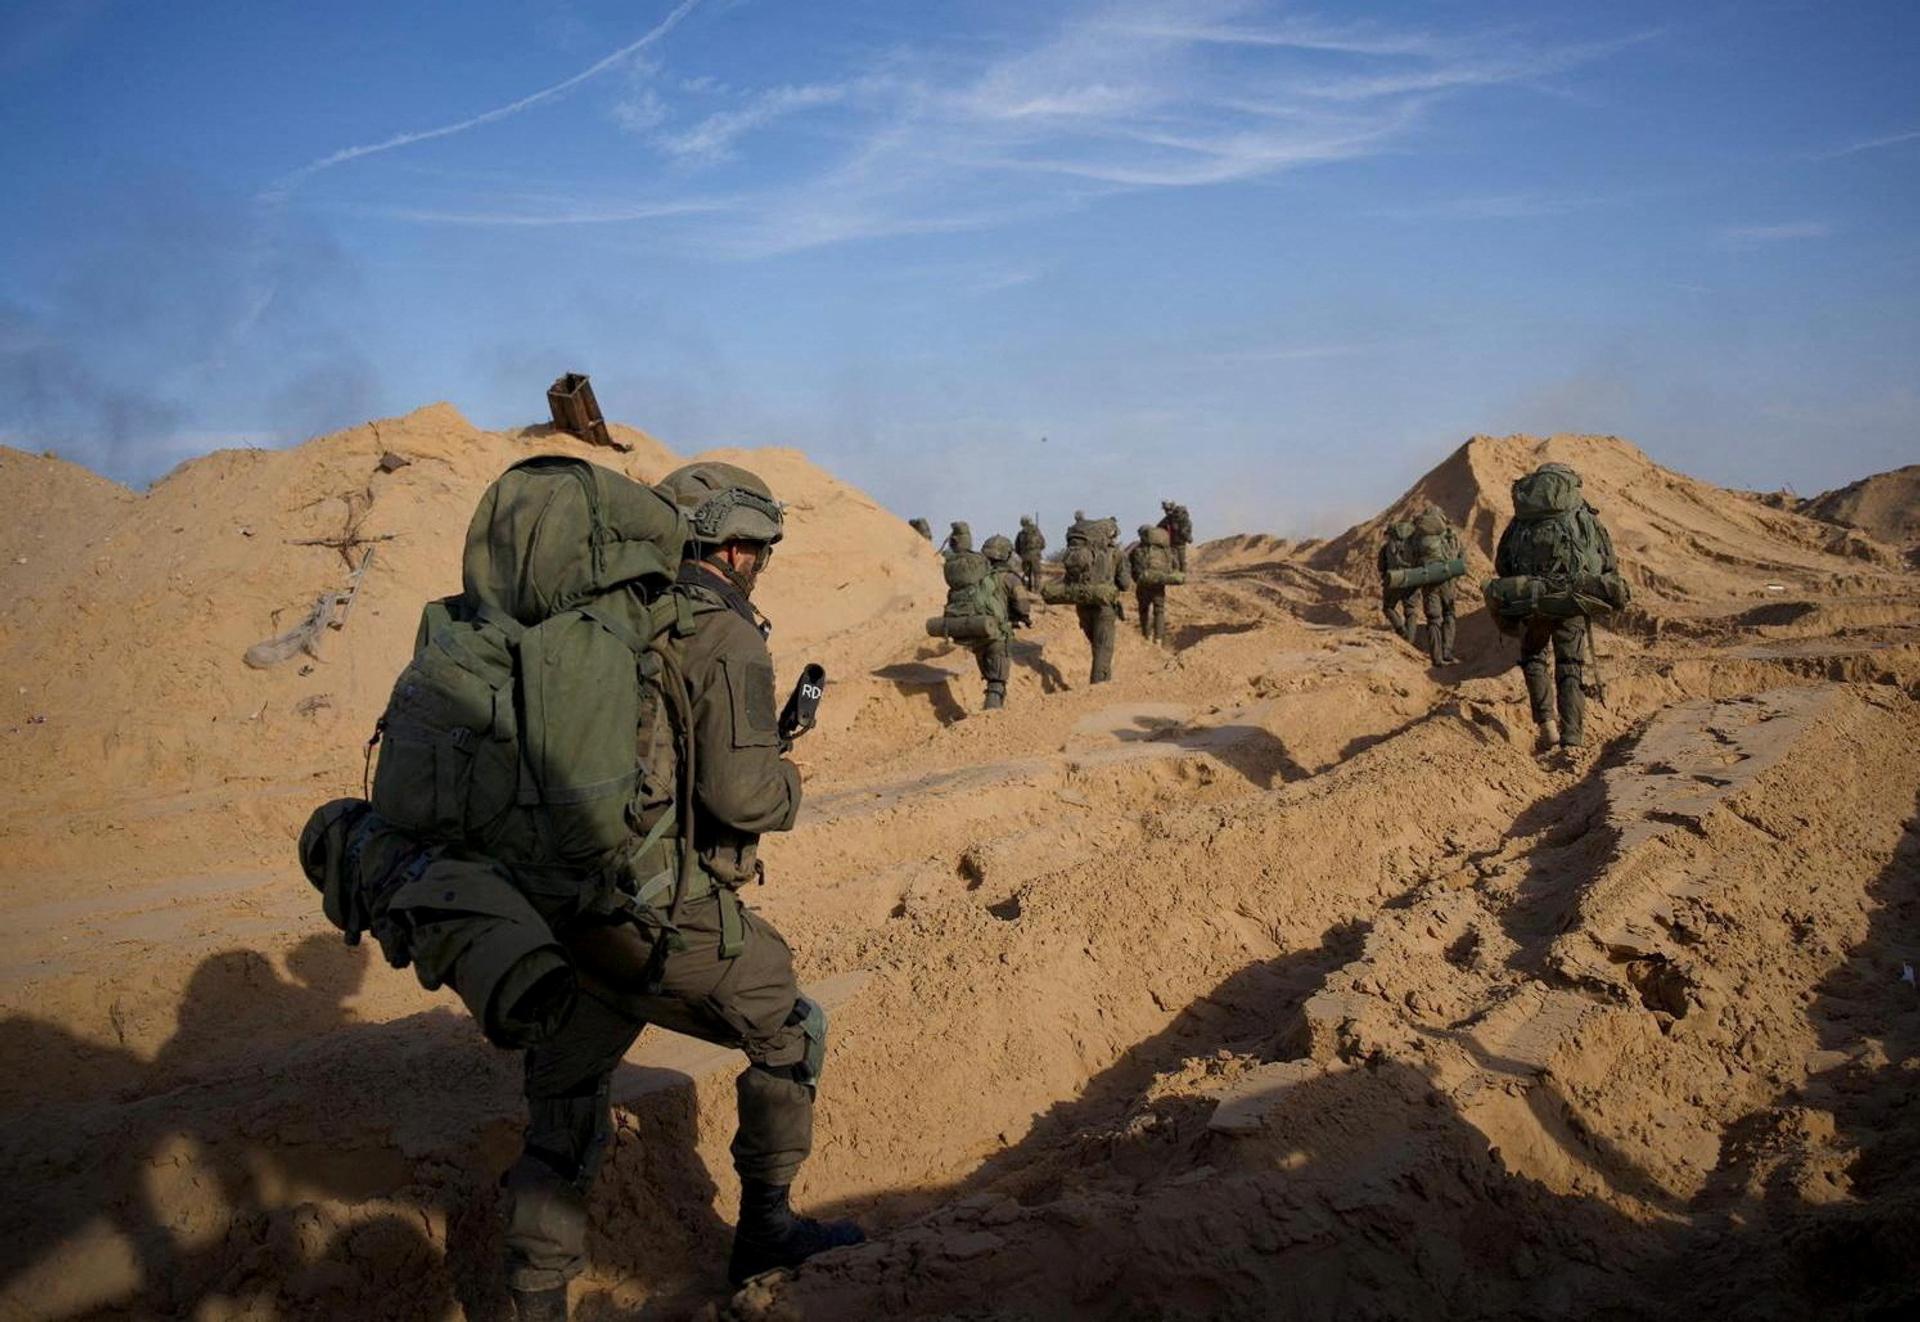 Israeli soldiers take part in an operation against Palestinian Islamist group Hamas, in a location given as Gaza.